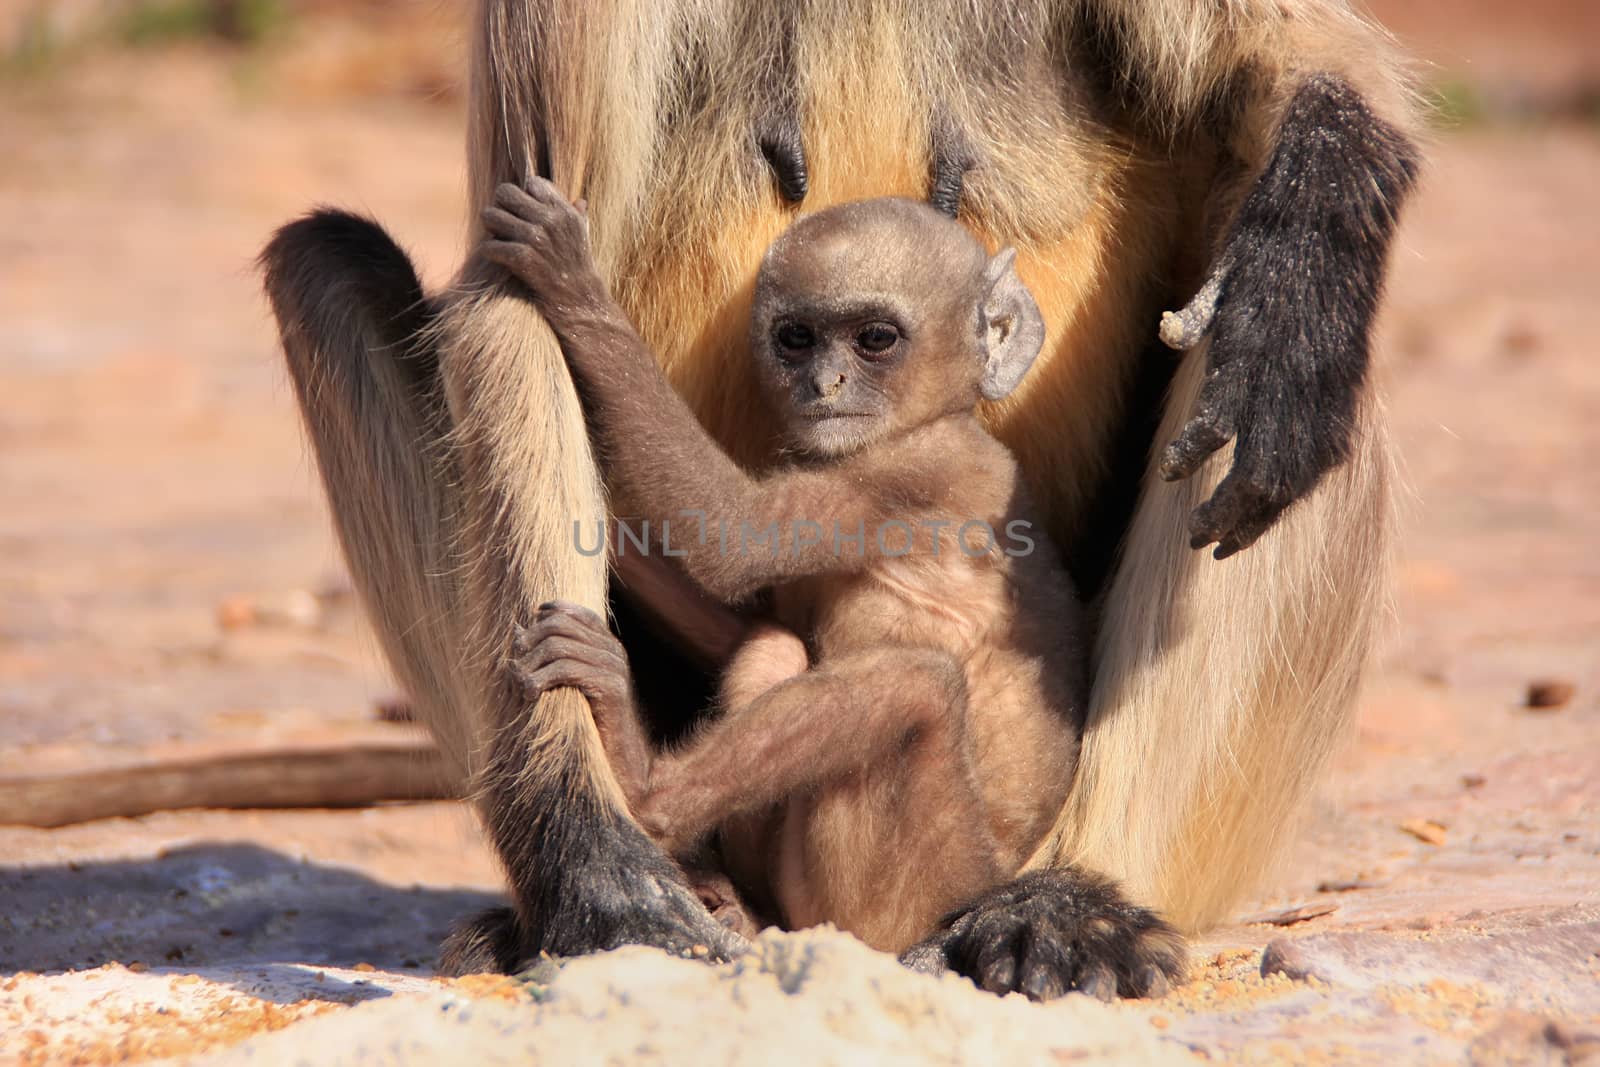 Baby Gray langur (Semnopithecus dussumieri) playing near mother, by donya_nedomam